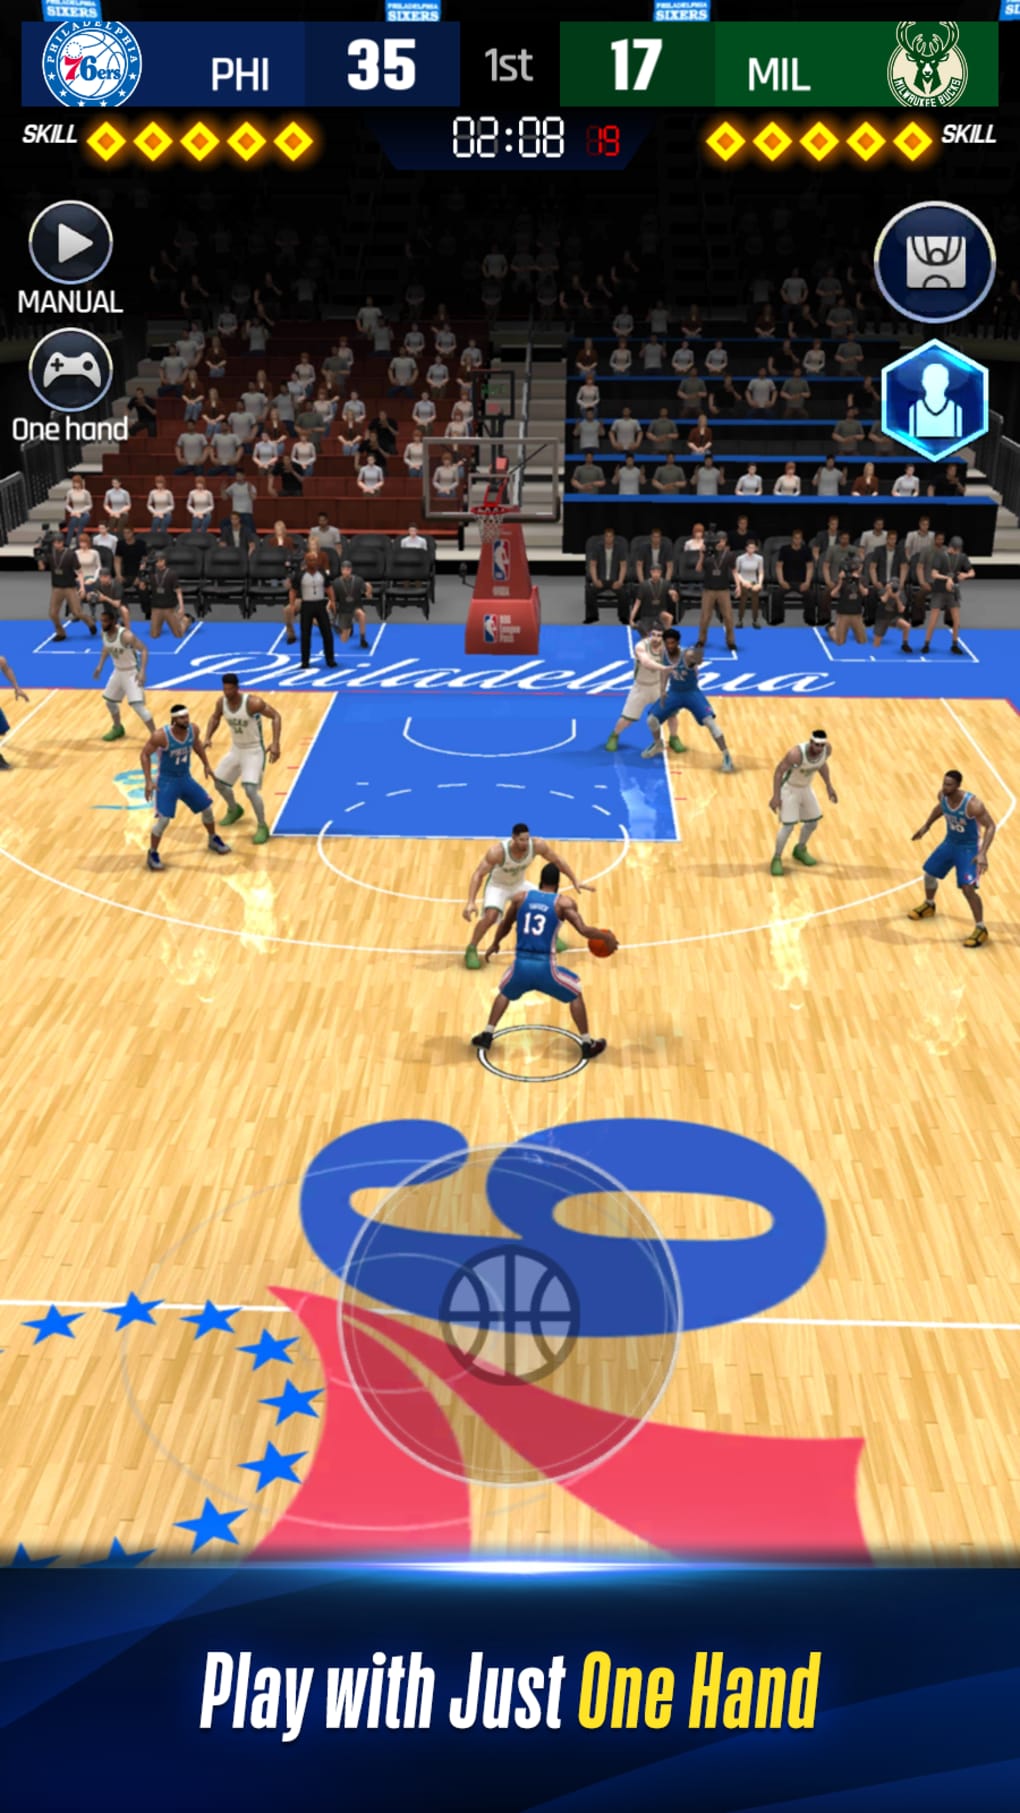 How to Download NBA NOW 23 on Android